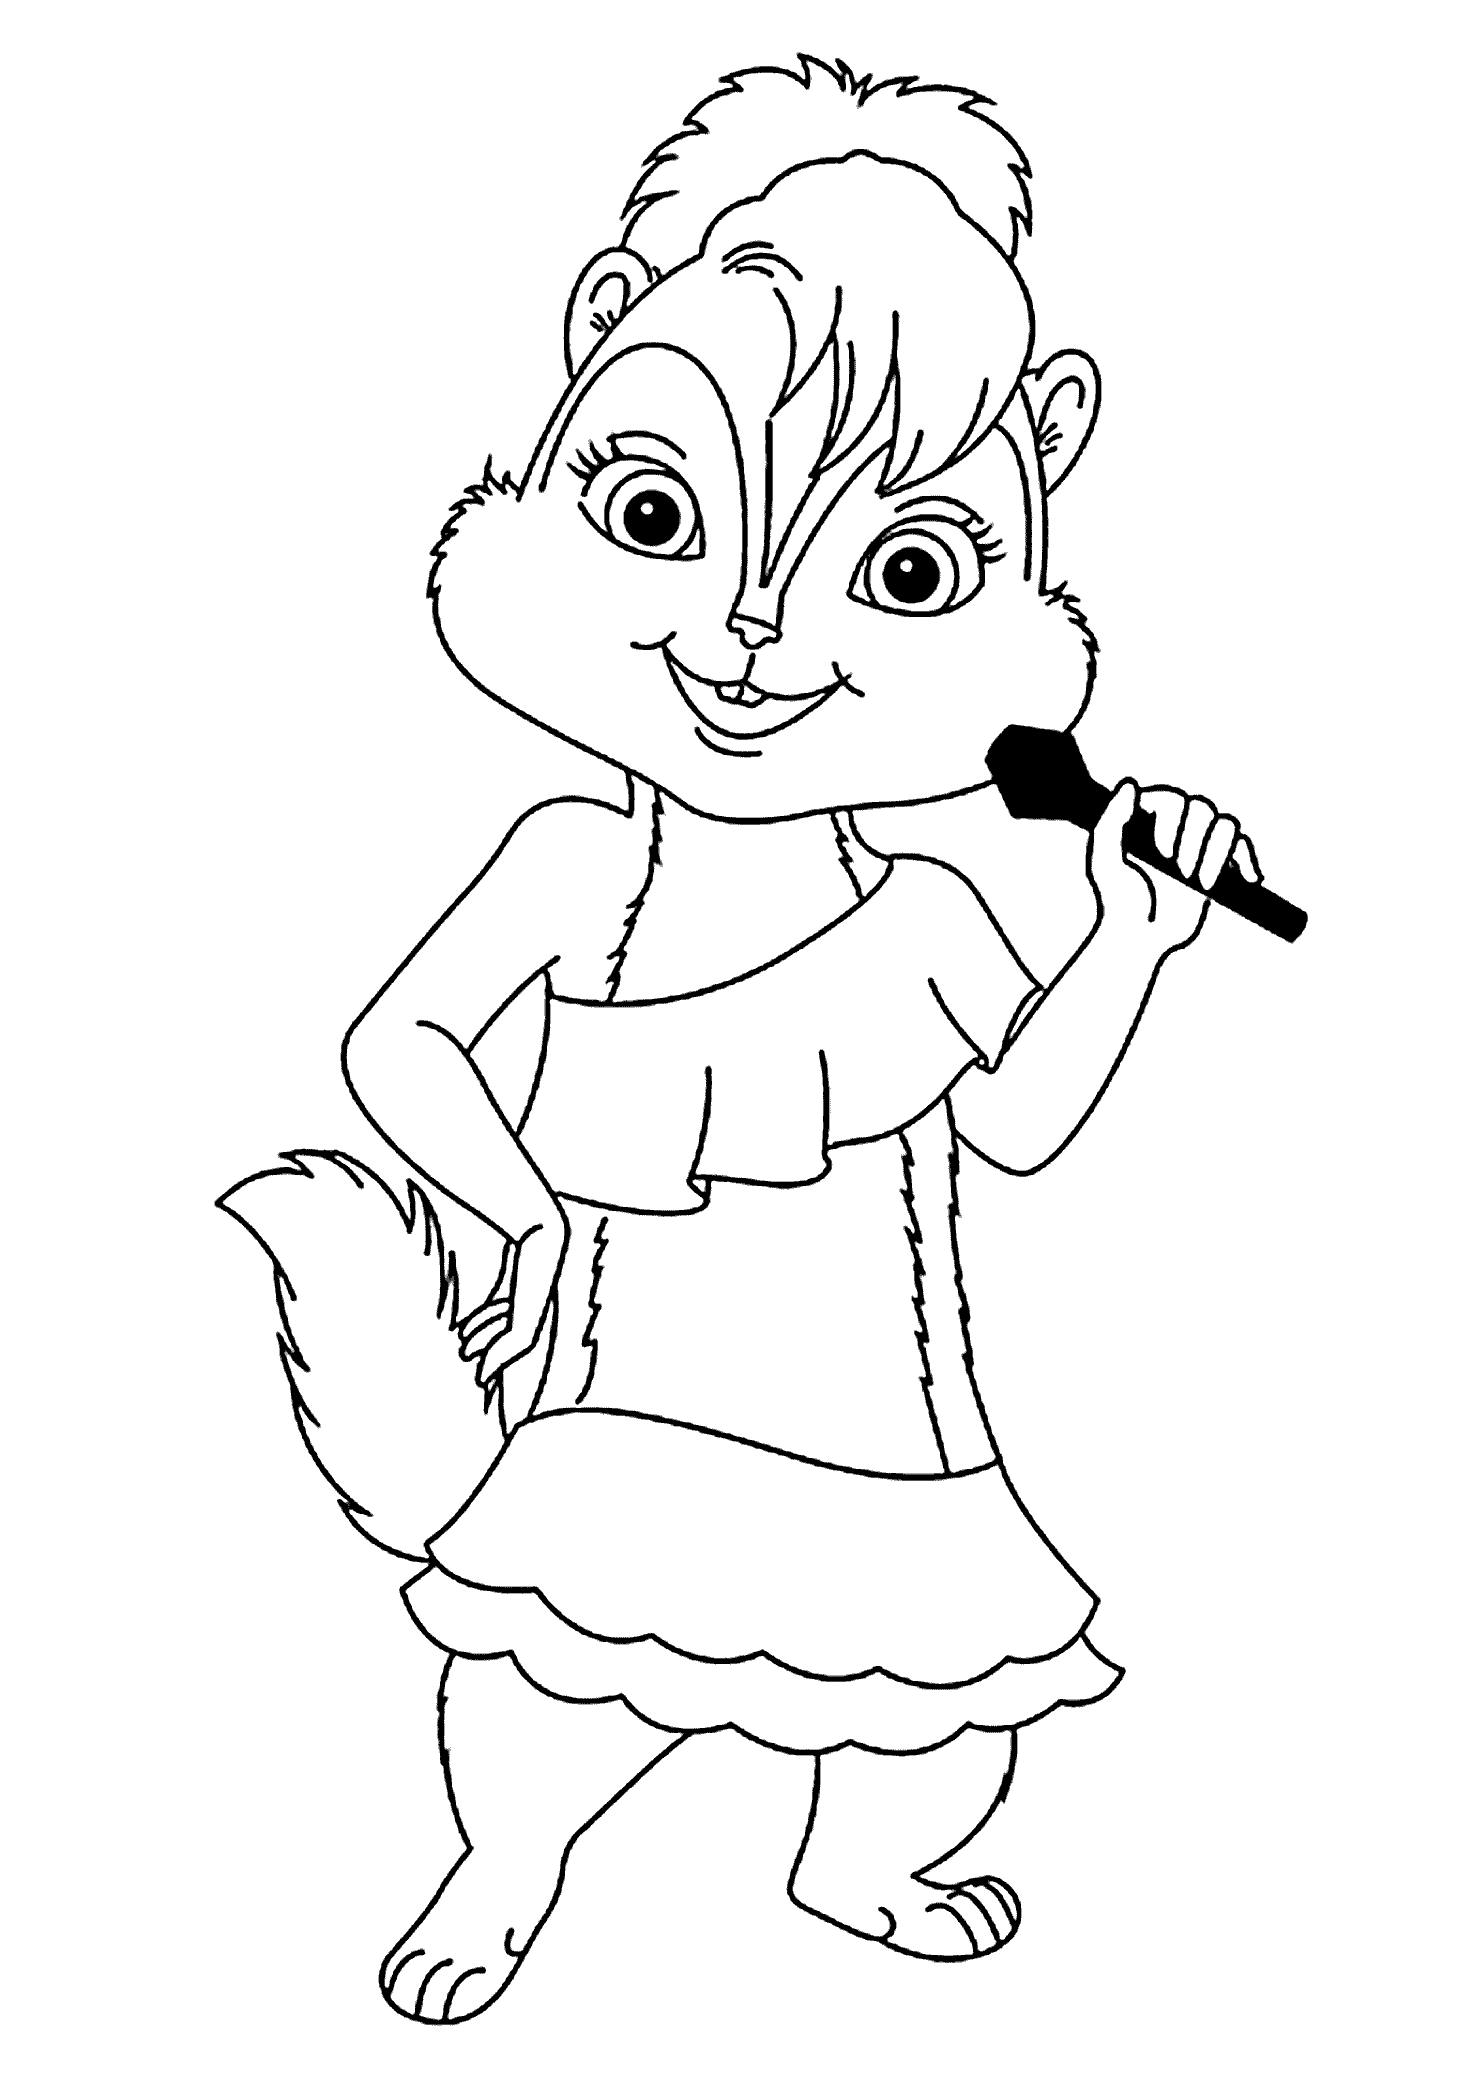 Alvin And The Chipmunks Coloring Pages Print - Coloring Pages For ...